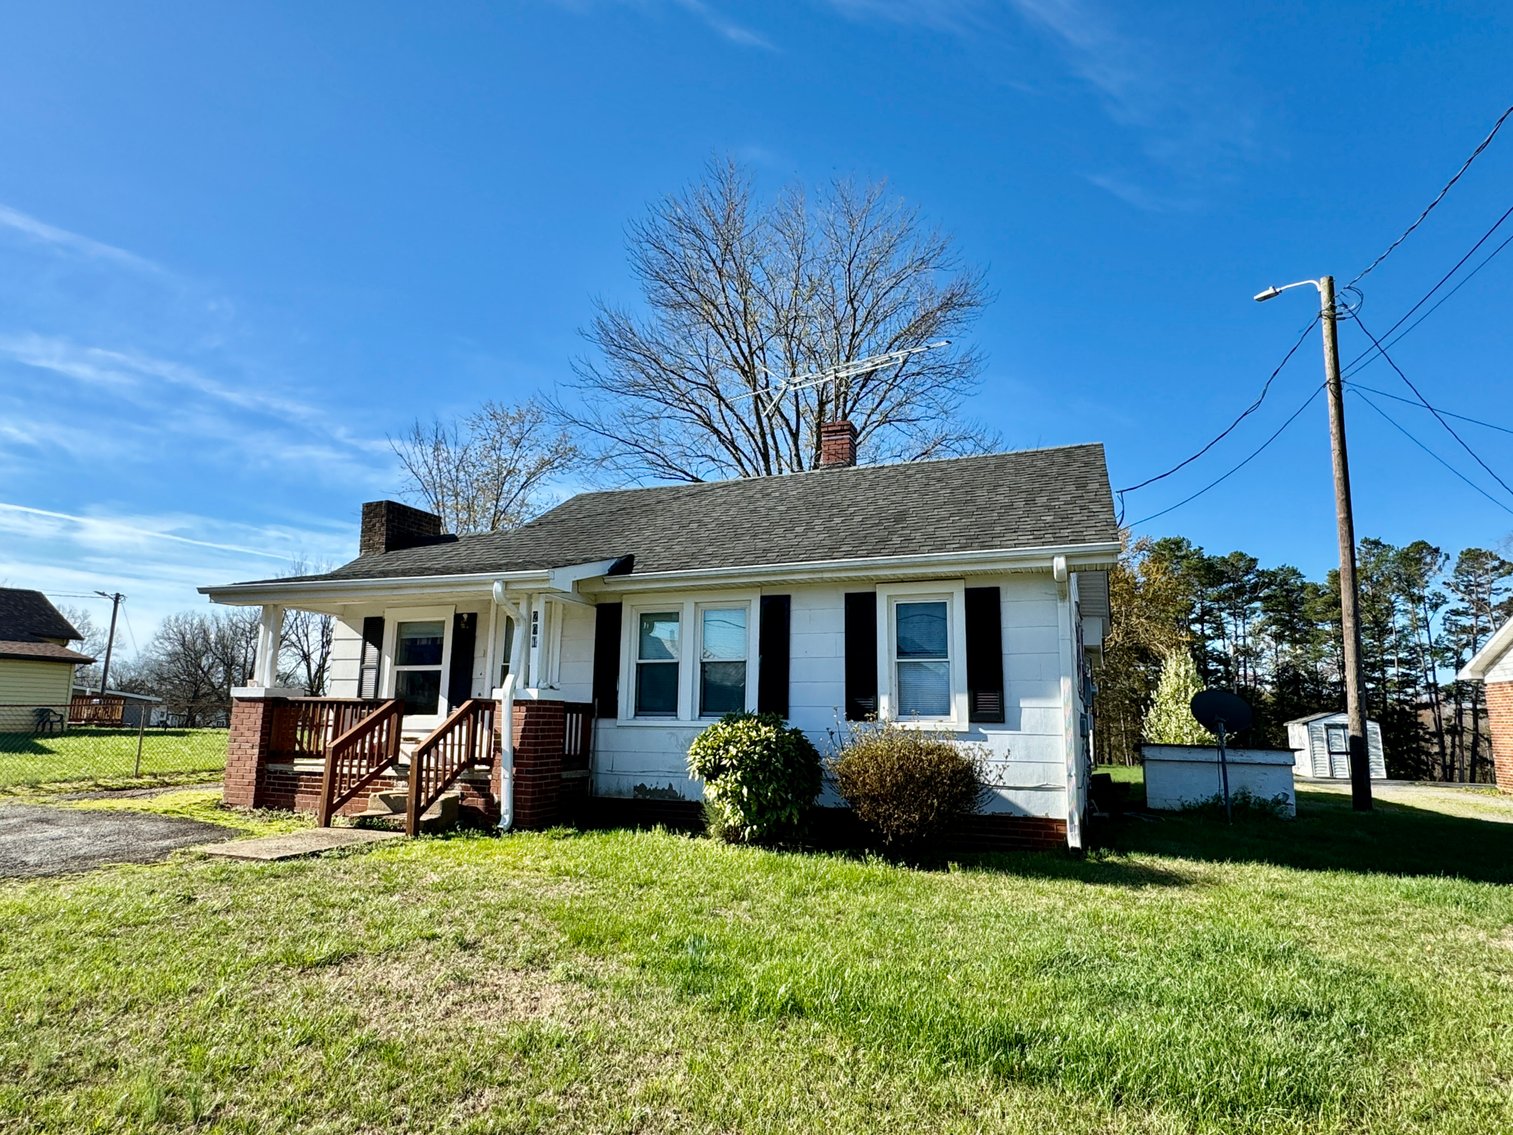 JUDICIAL SALE - 2 Bed/1 Bath Home in East Bend, NC